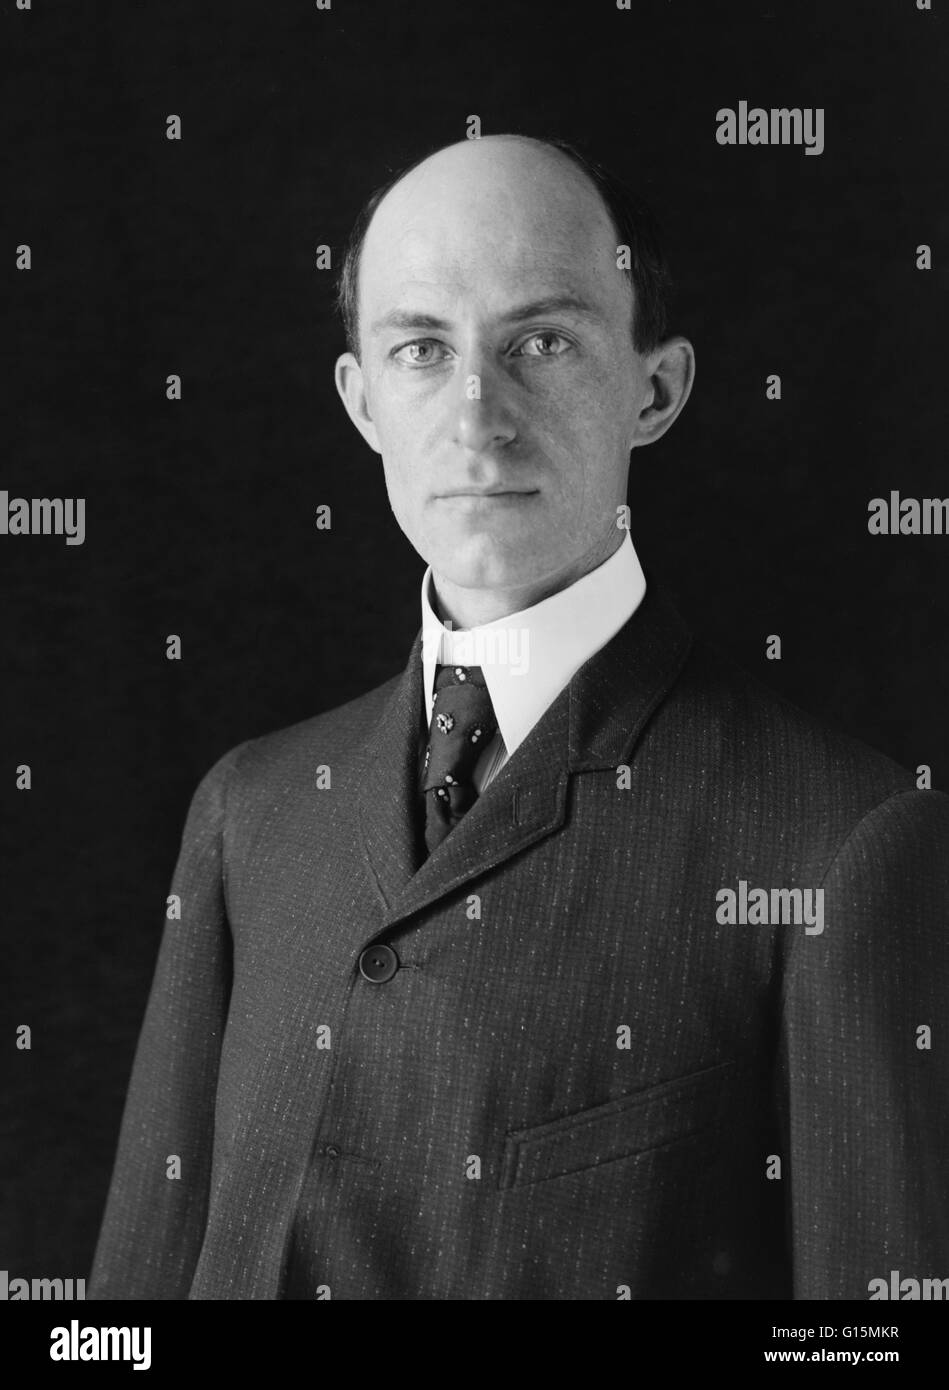 Wilbur Wright (1867-1912) and his brother Orville (1871-1948), were two Americans credited with inventing and building the world's first successful airplane and making the first controlled, powered and sustained heavier-than-air human flight, on December Stock Photo